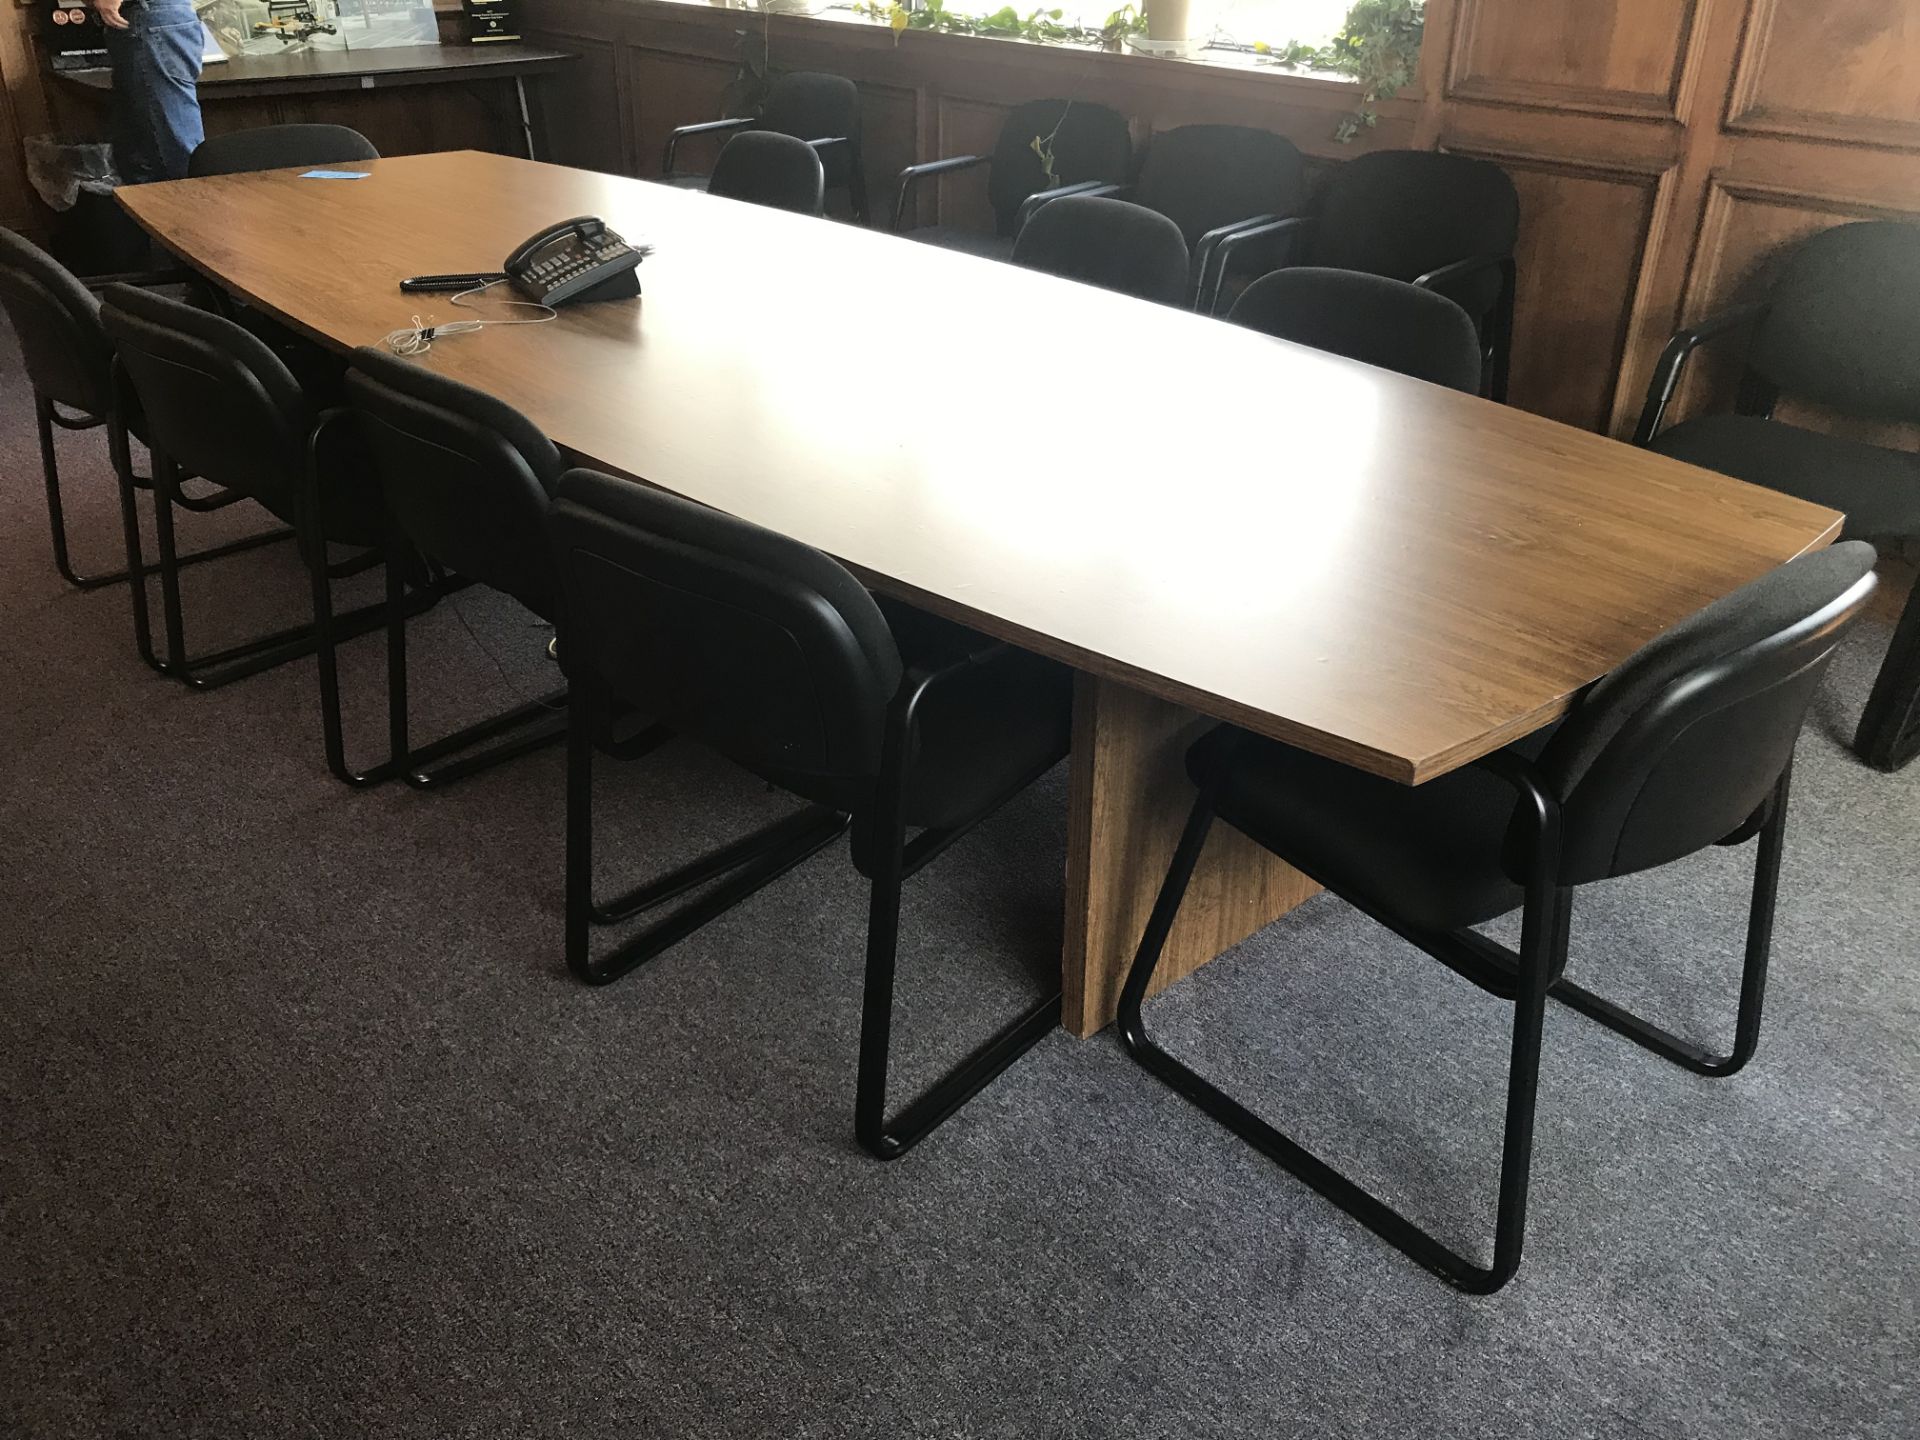 Conference Table with (15) Chairs, (Upstairs) - Image 2 of 2